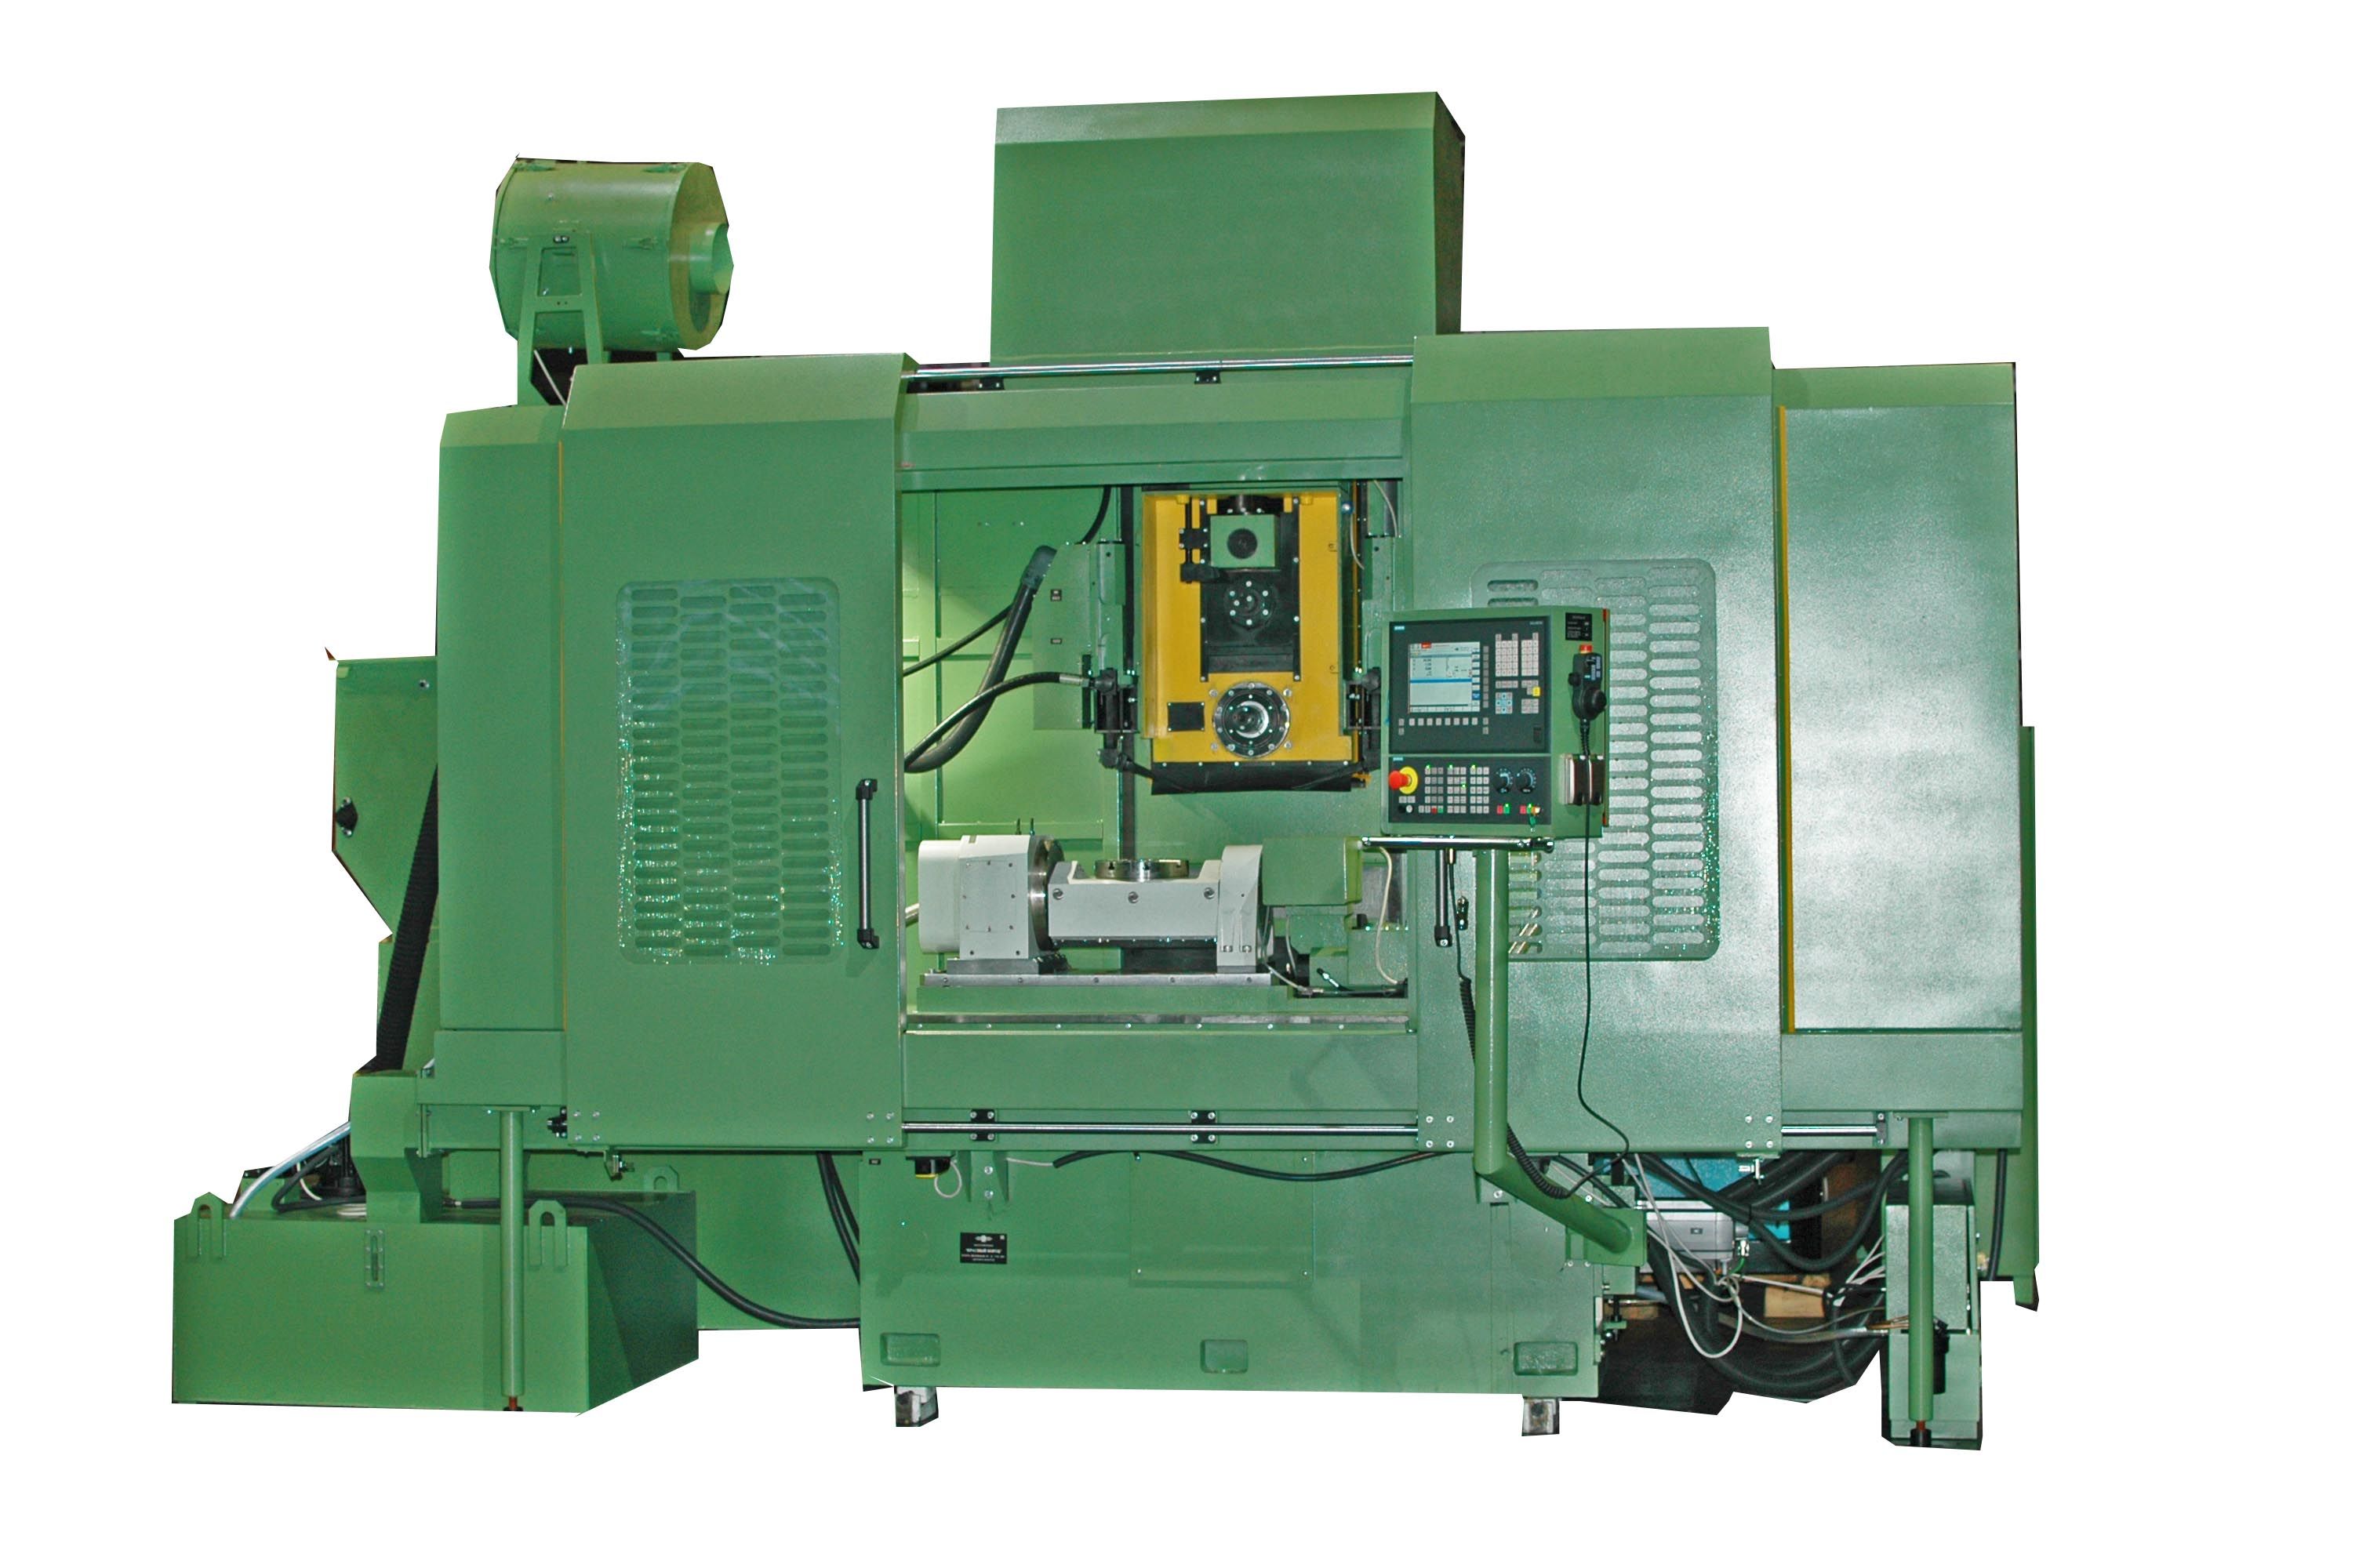 SEMIAUTOMATIC CREEP FEED SURFACE PROFILE GRINDING MACHINE WITH CNC OSH-221F3 VERSION 04 